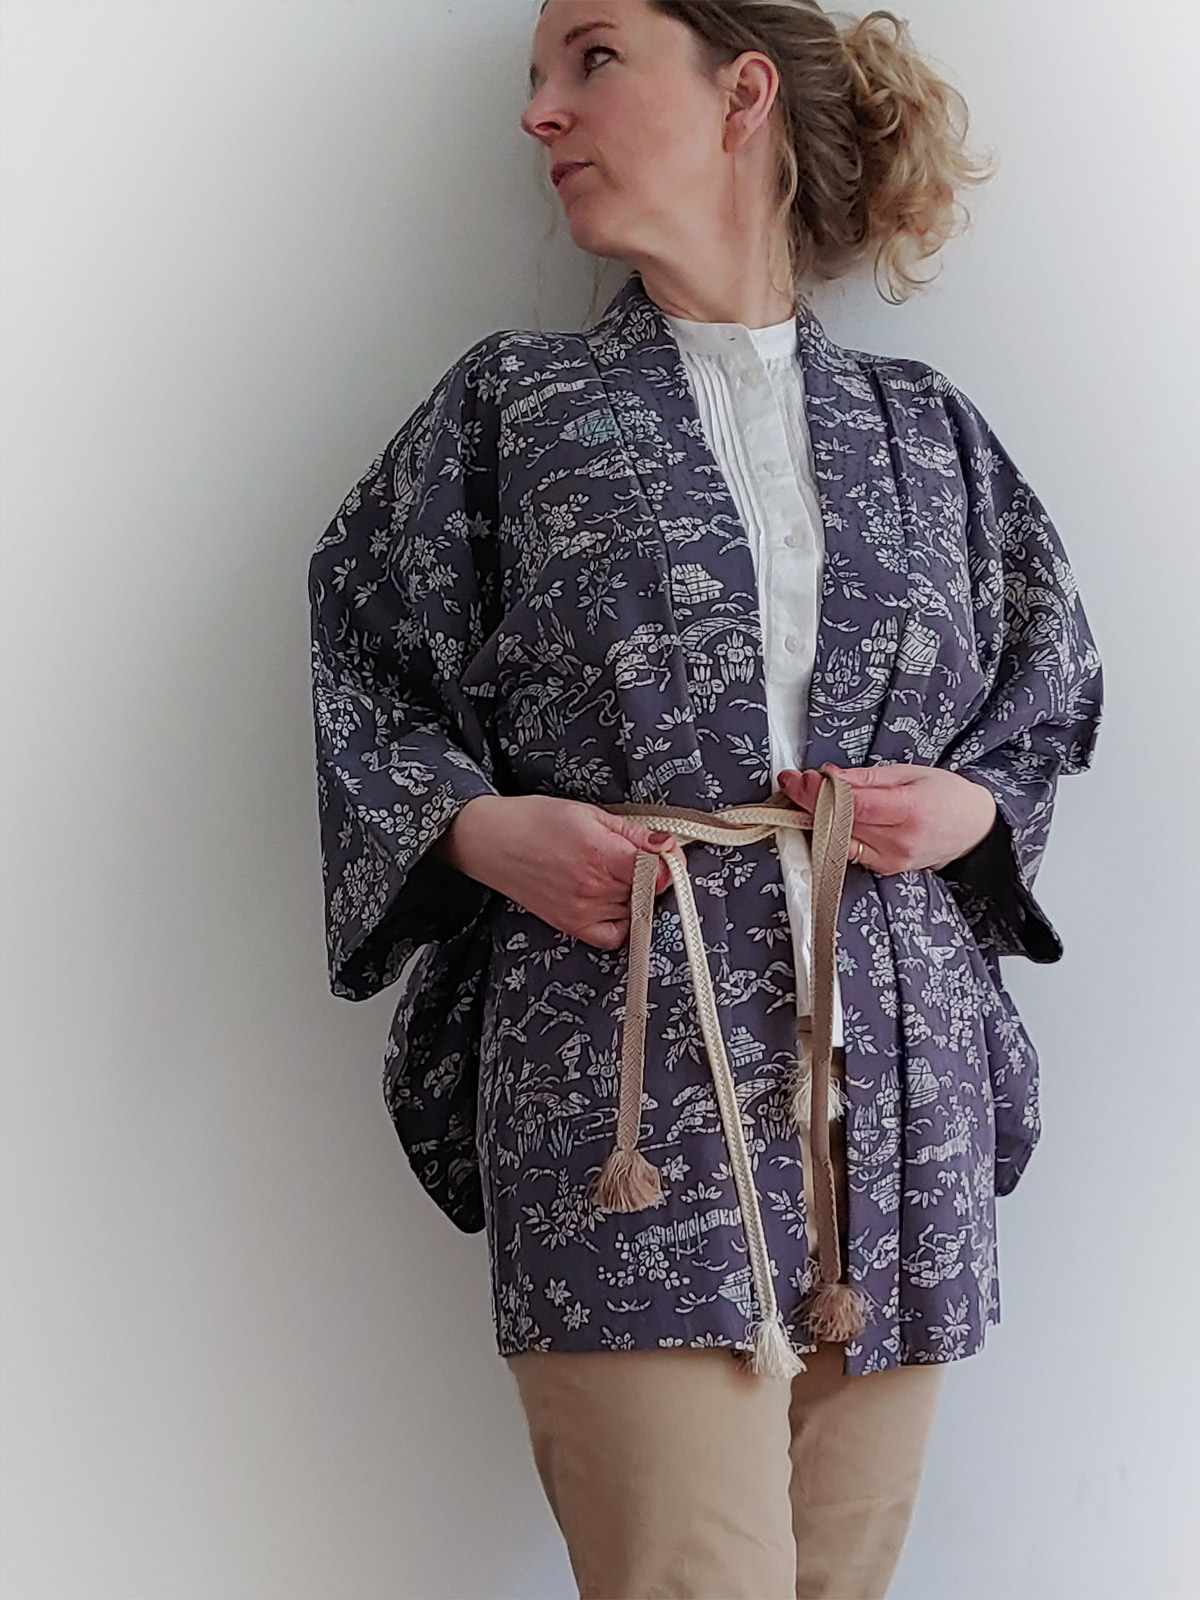 Yoshi – Kimono jacket in blueberry color with stencildesign